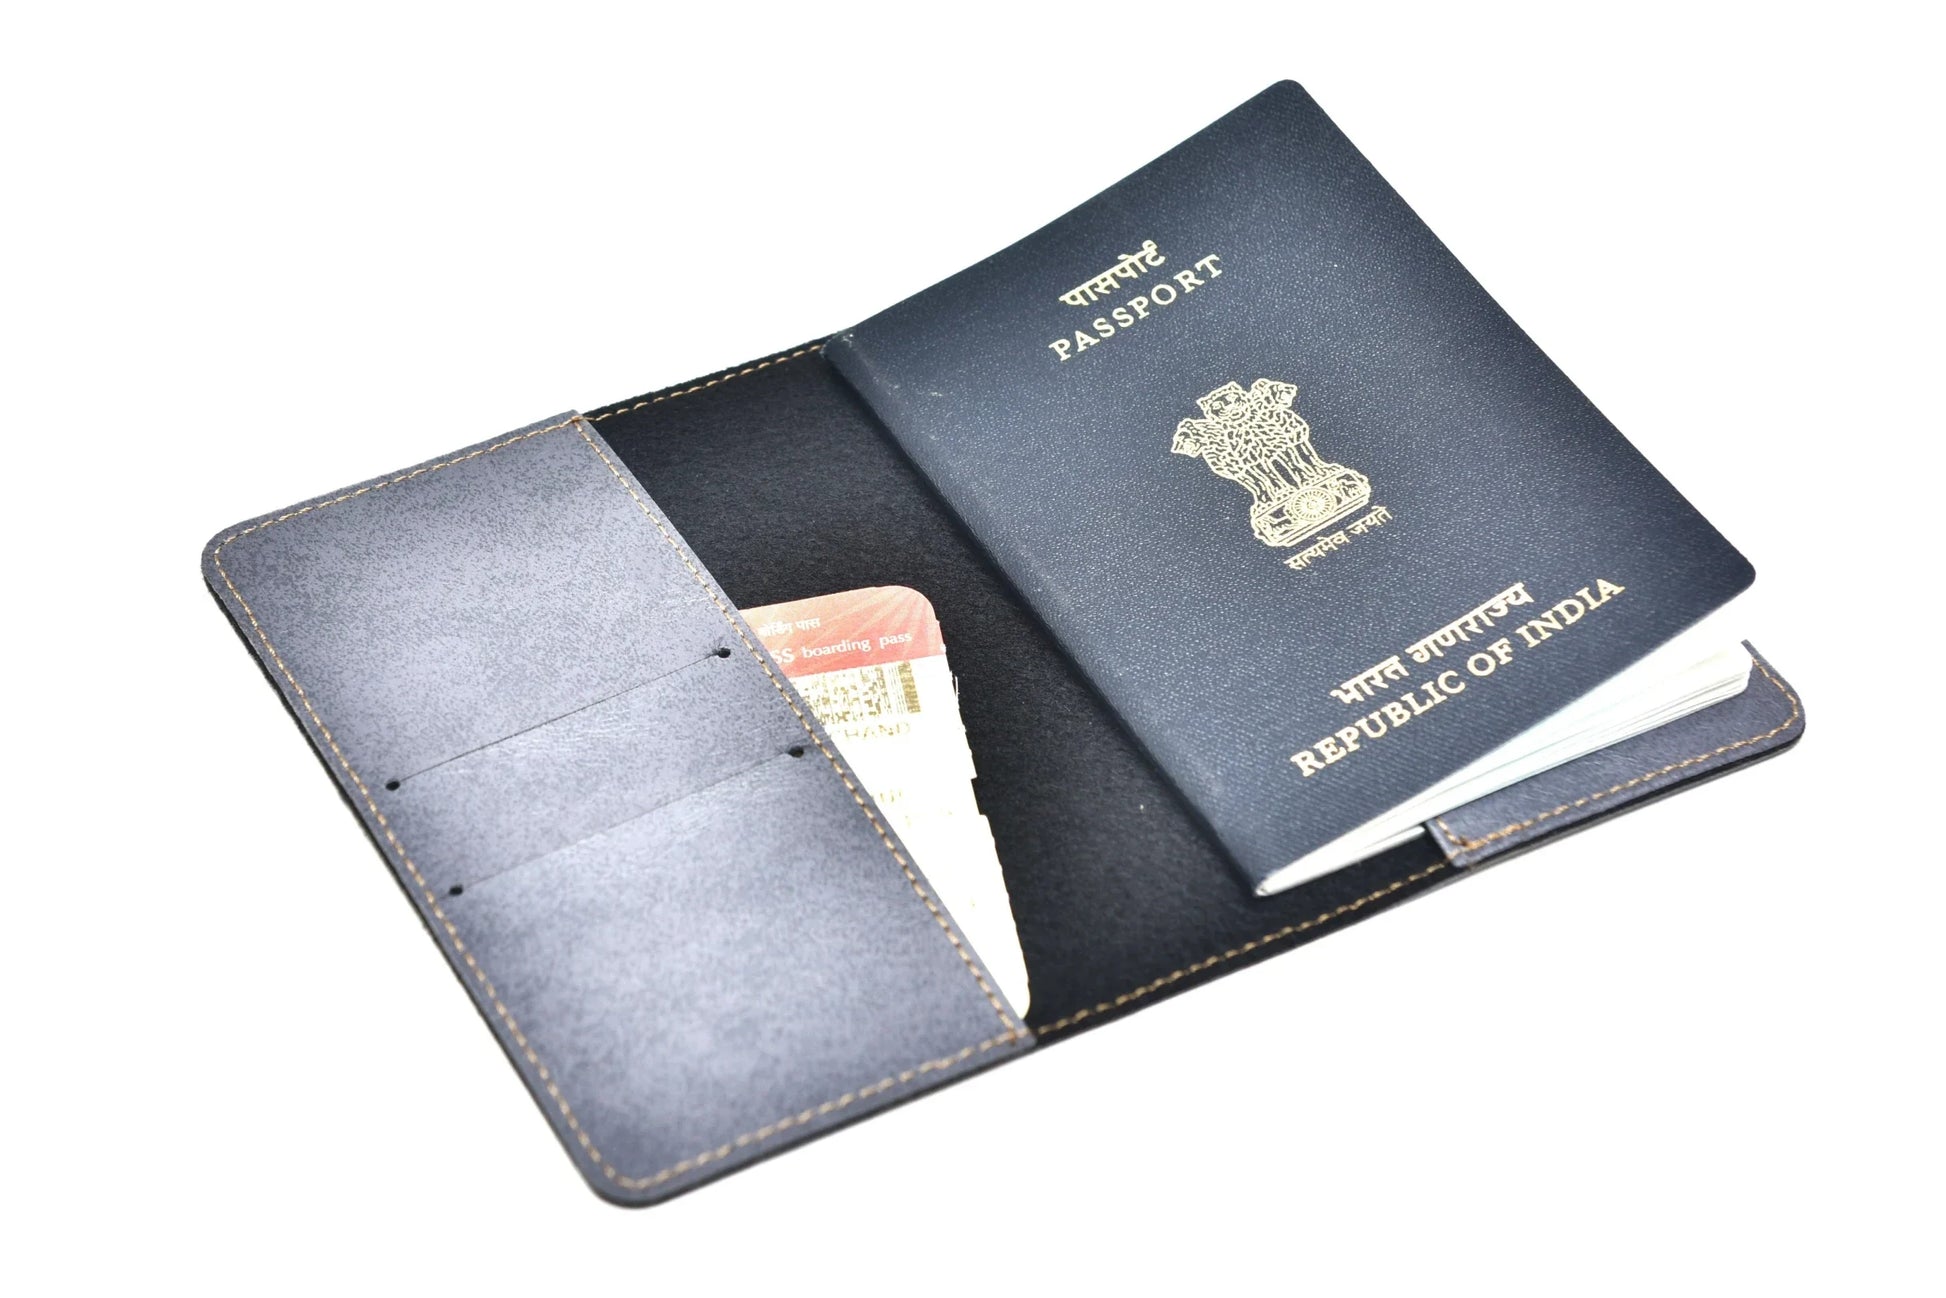 Inside or open view of grey passport case